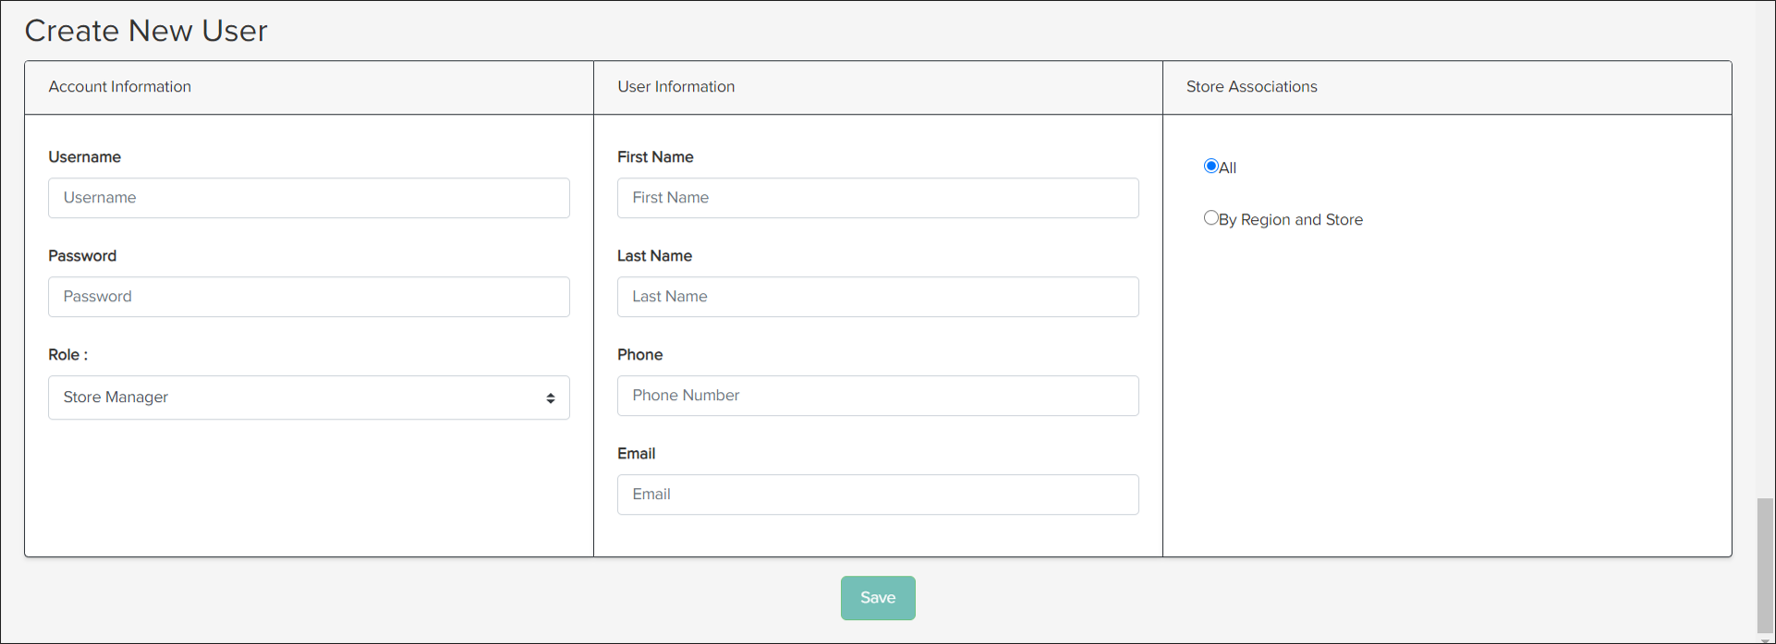 The Create New User configuration form